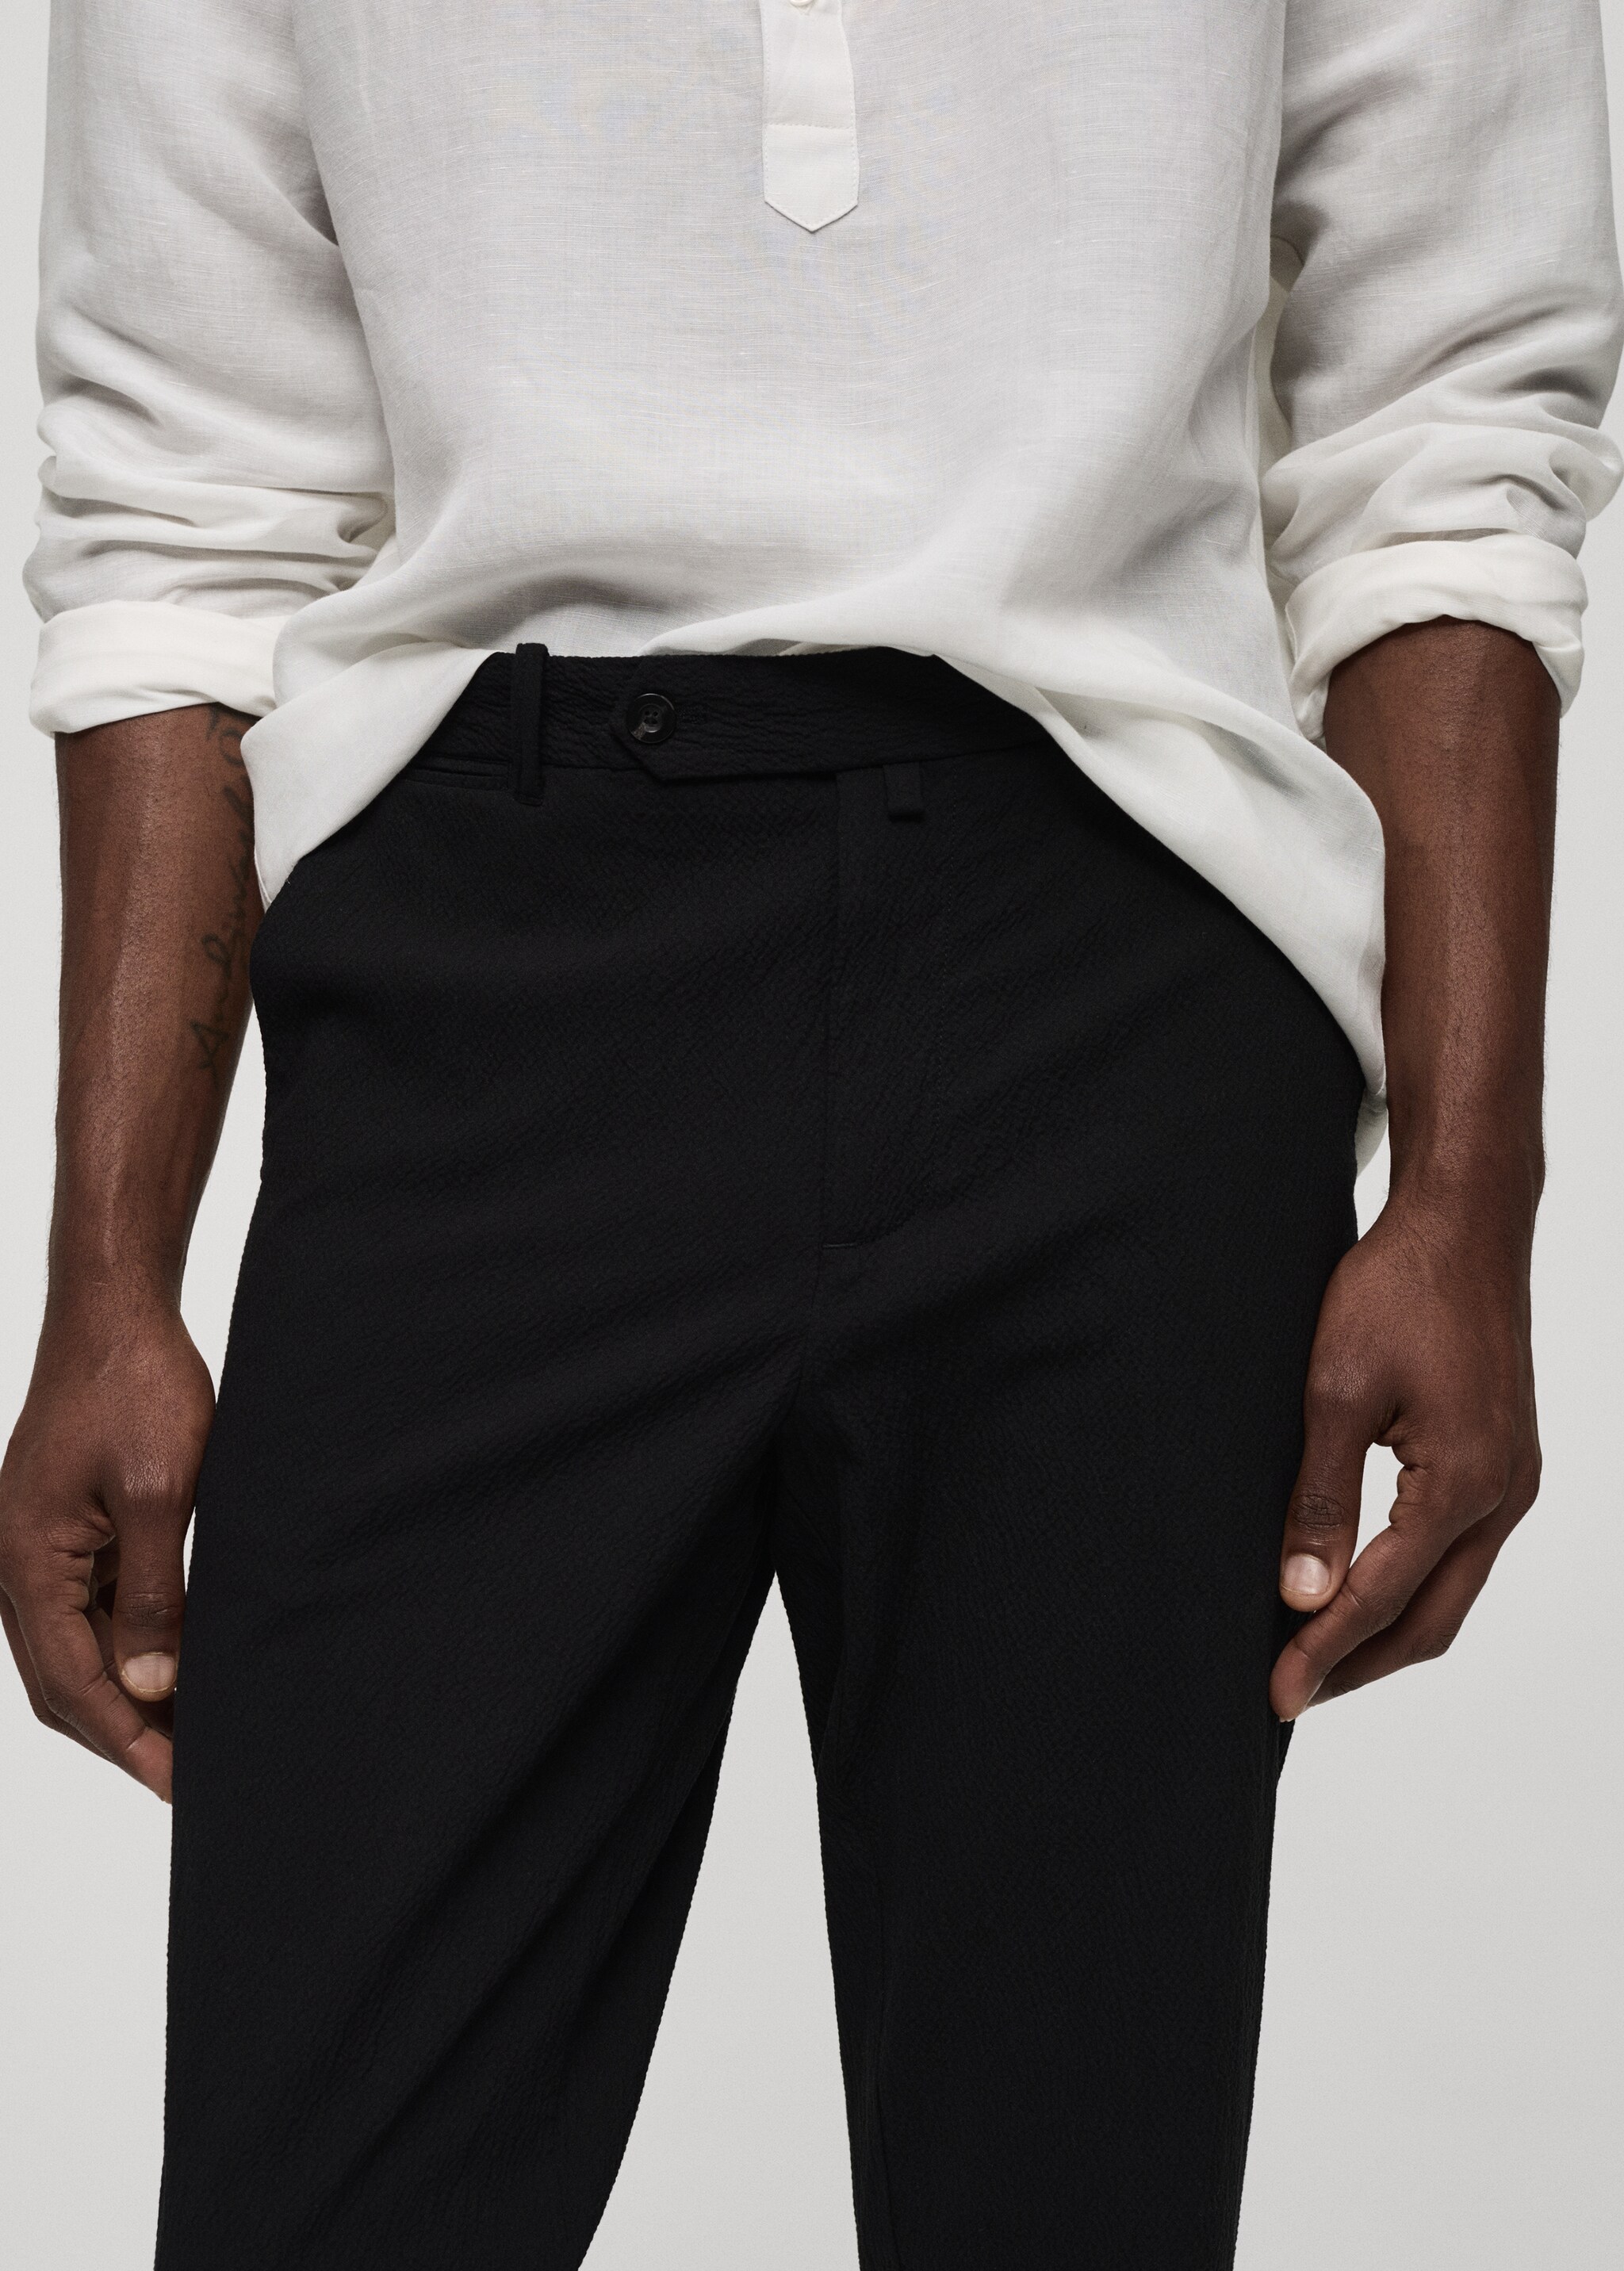 Seersucker cotton trousers - Details of the article 1